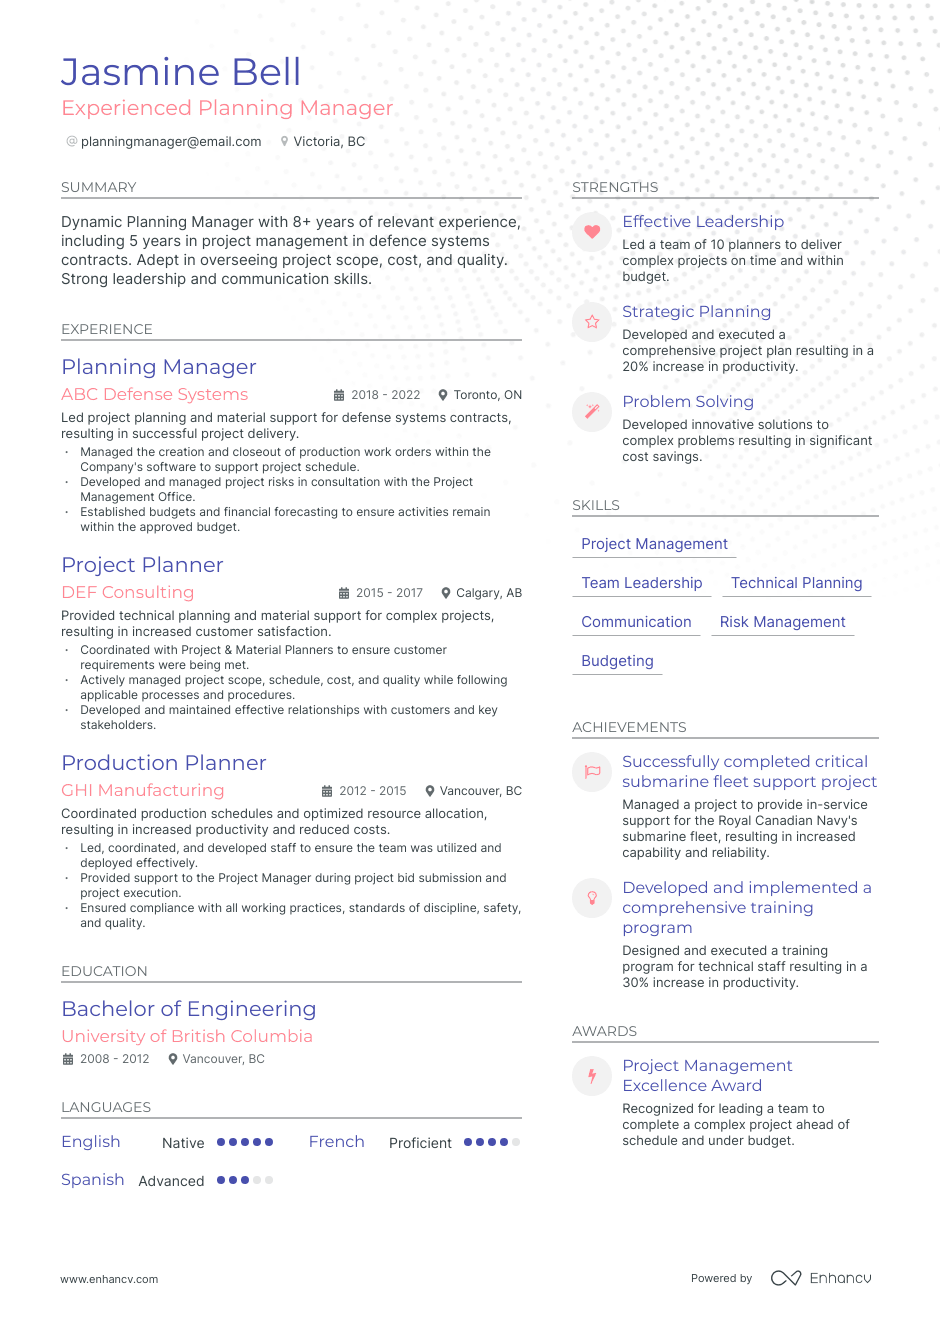 Planning Manager resume example